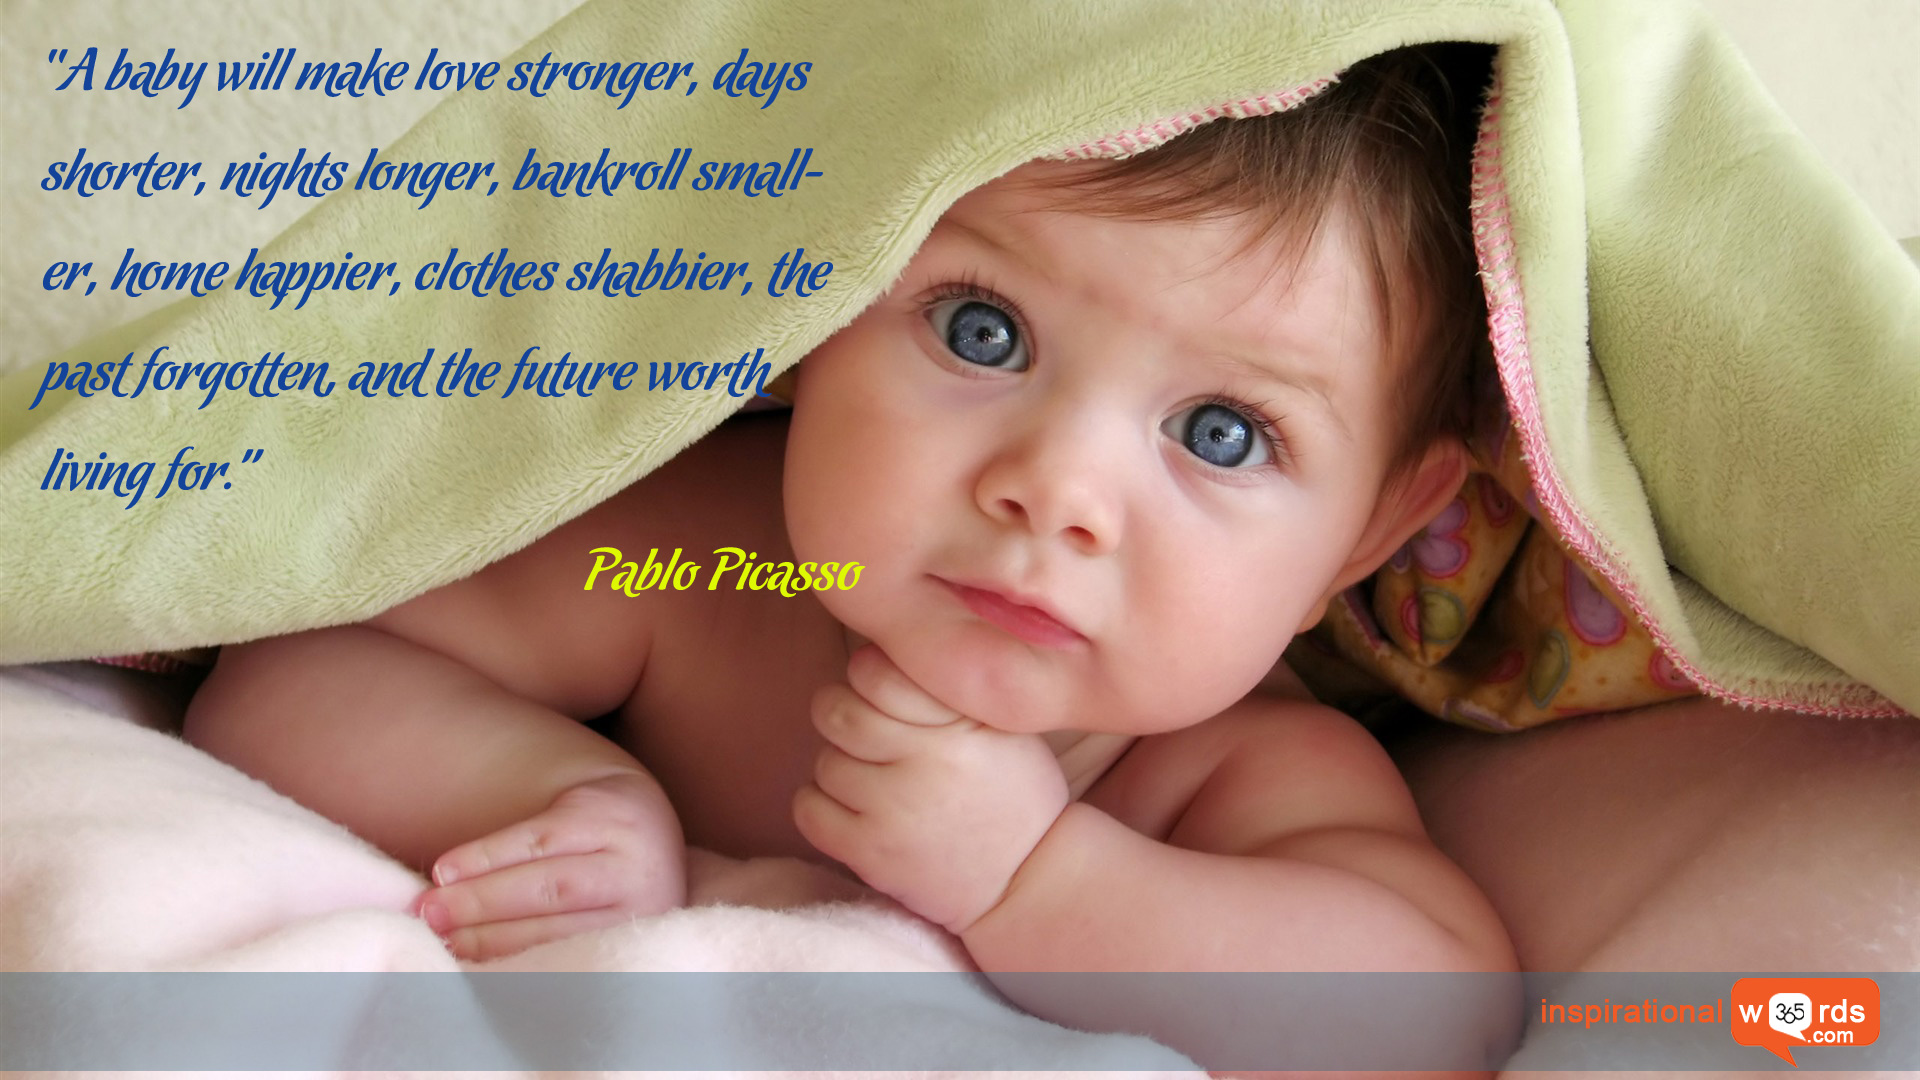 Inspirational Wallpaper Quote by Pablo Picasso